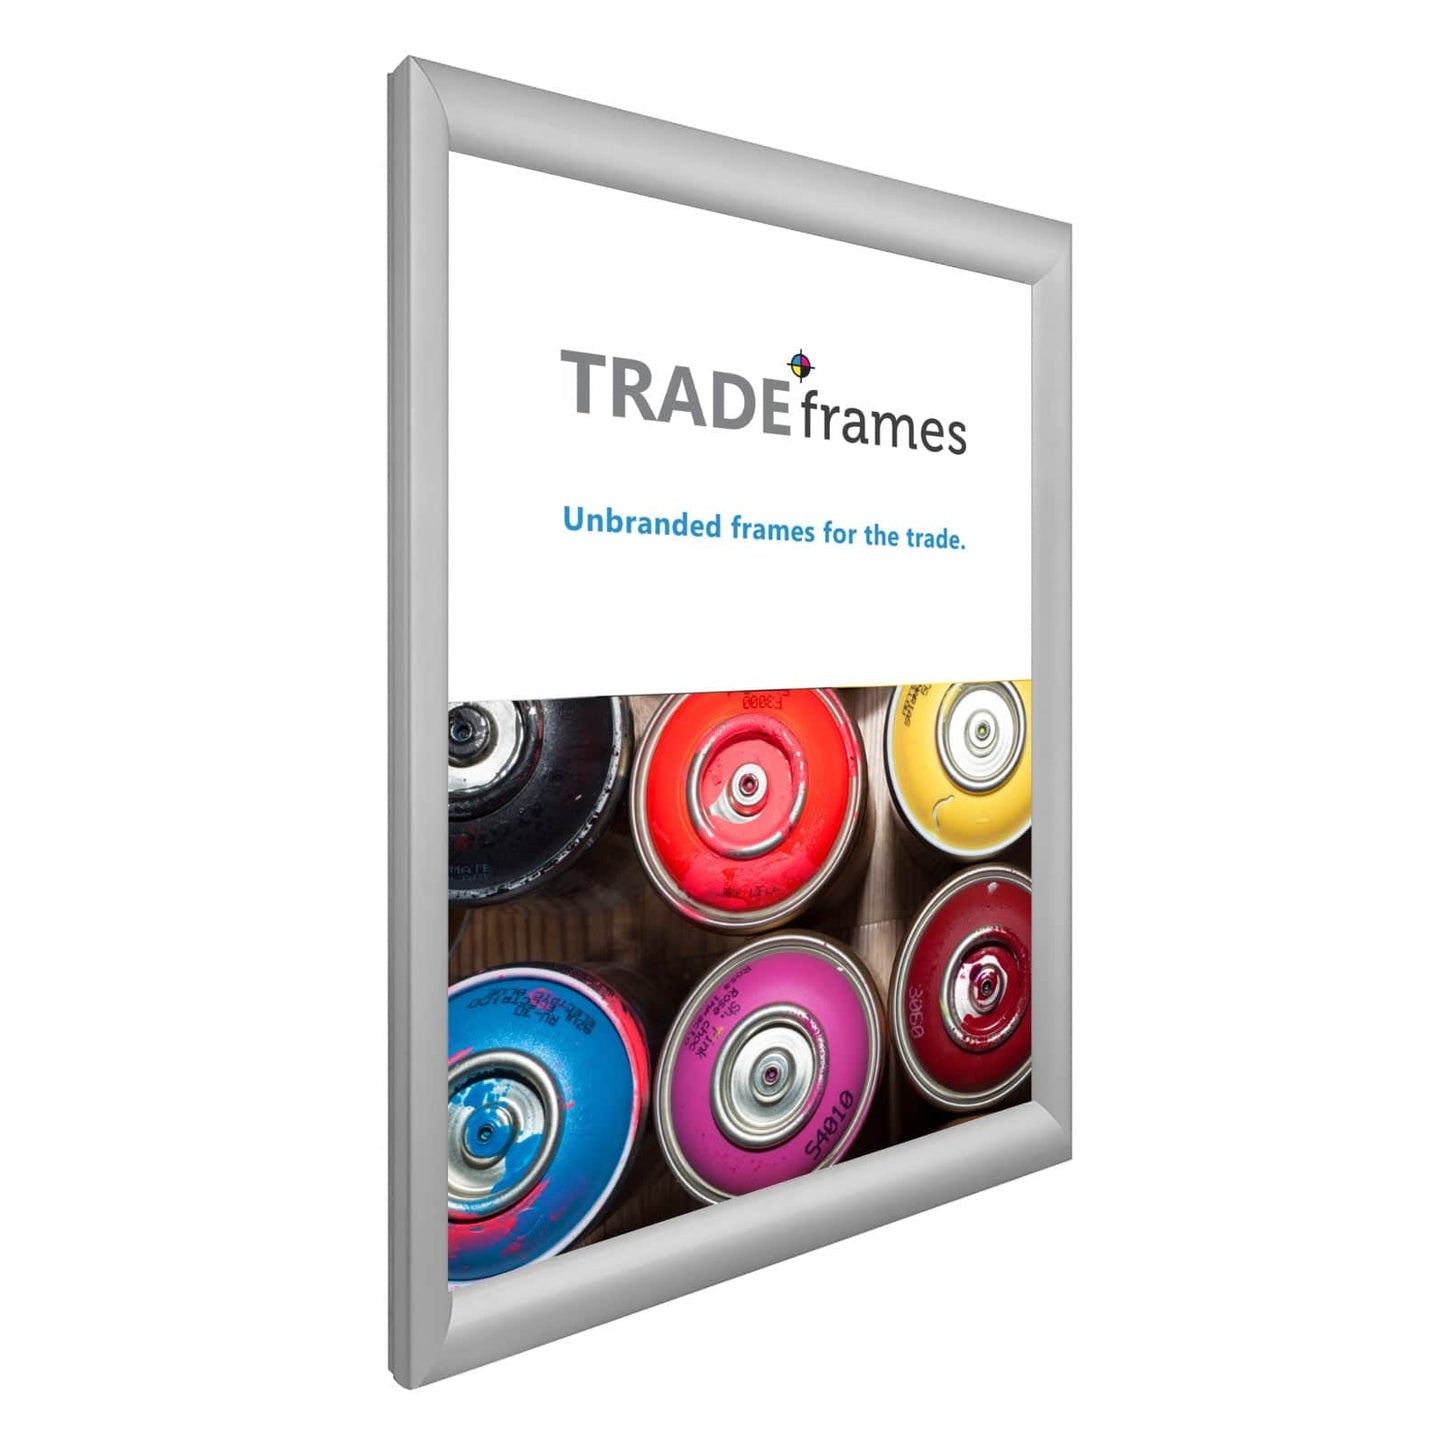 17x23  TRADEframe Silver Snap Frame 17x23 - 1.2 inch profile - Snap Frames Direct